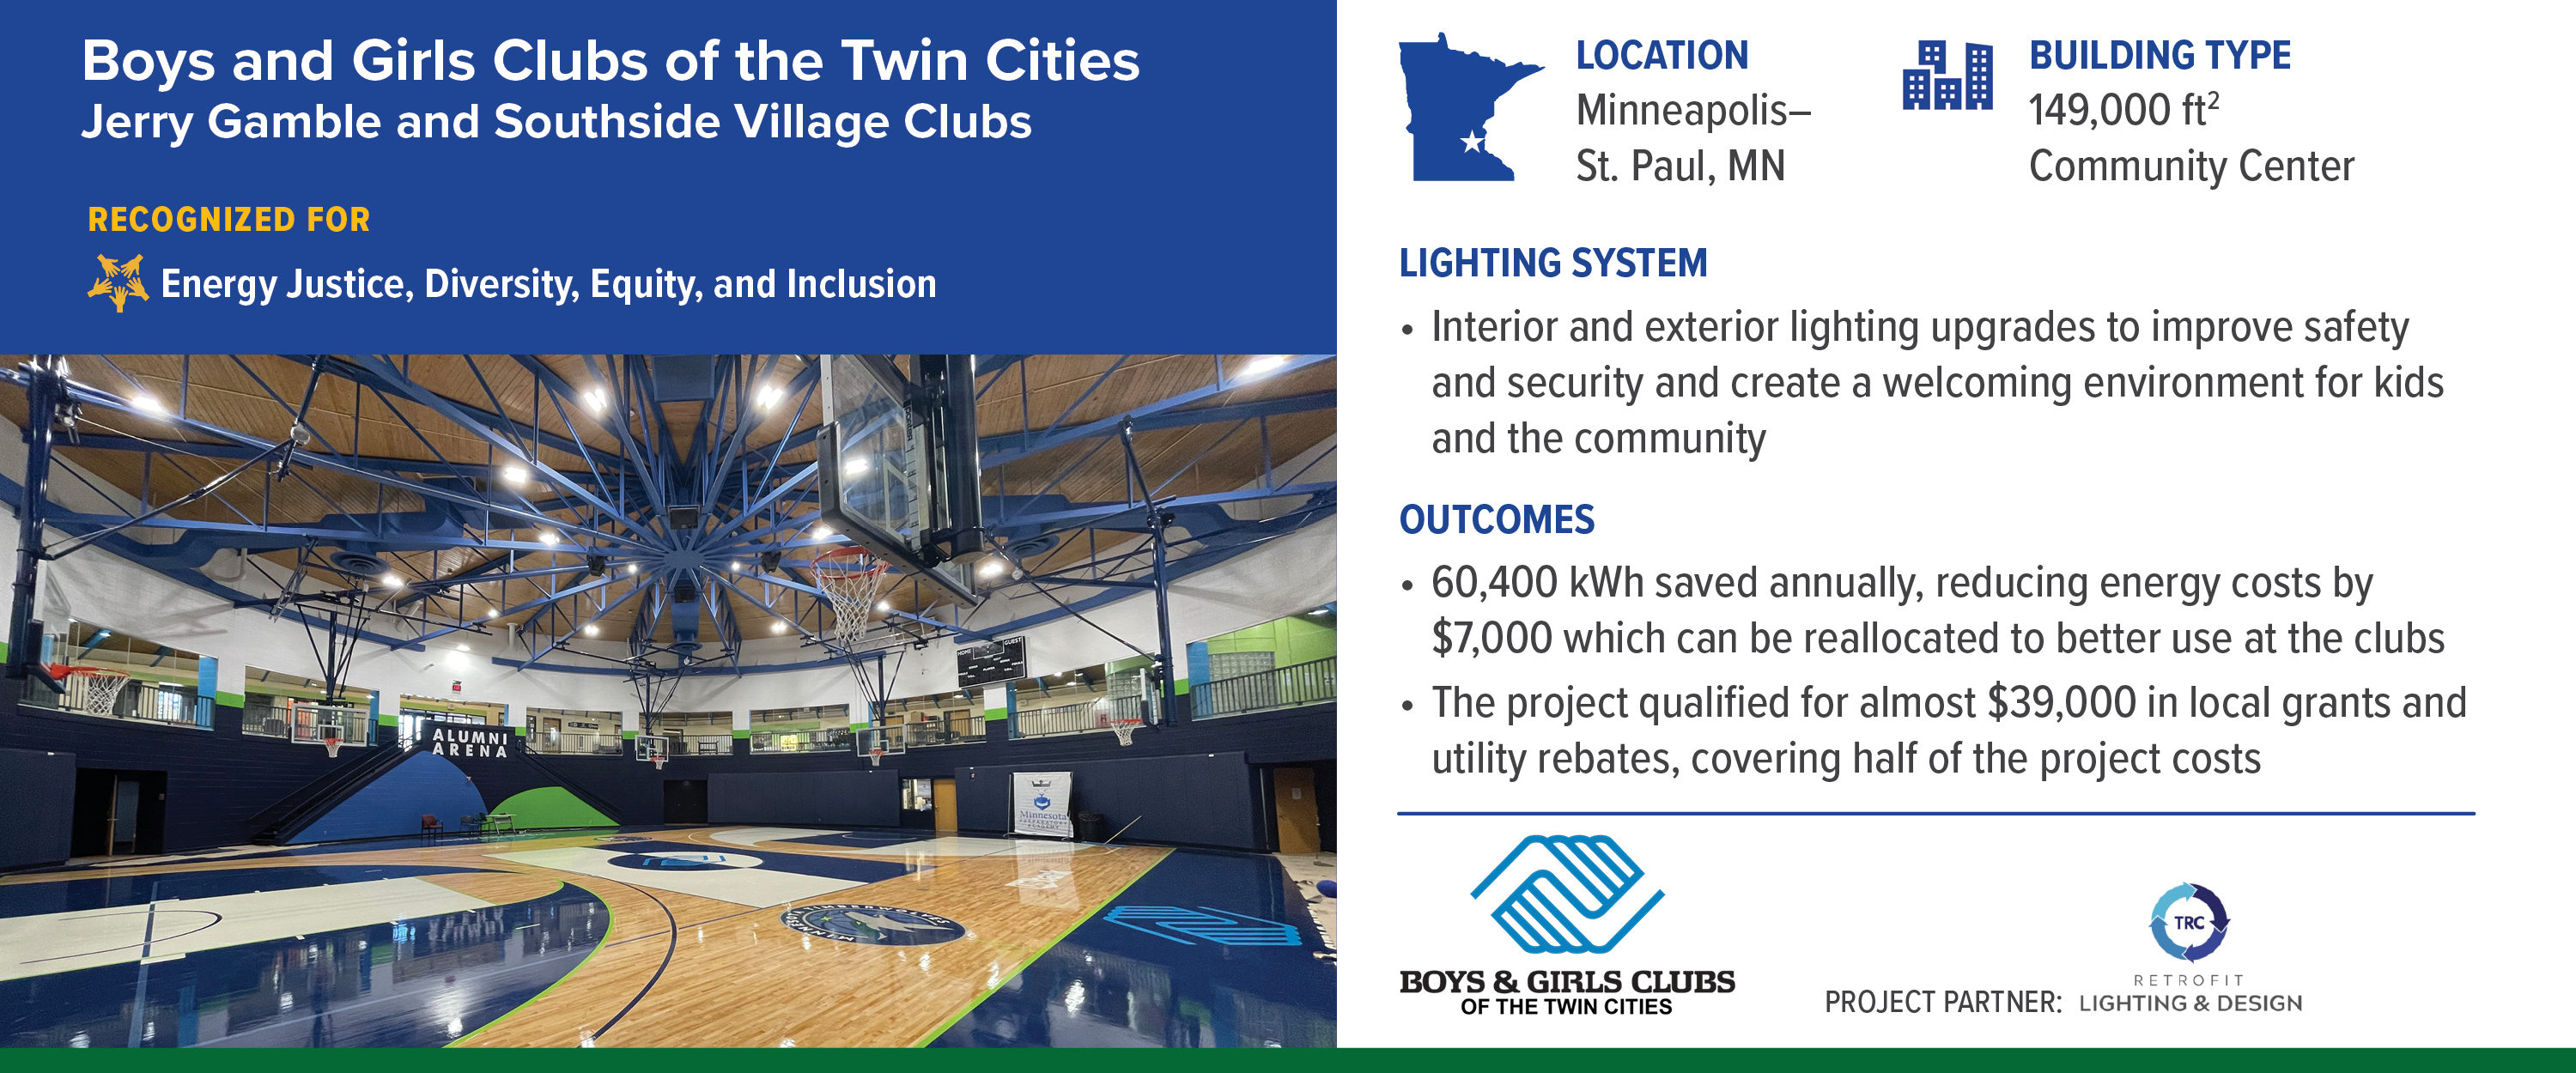 Boys and Girls Clubs in Minneapolis